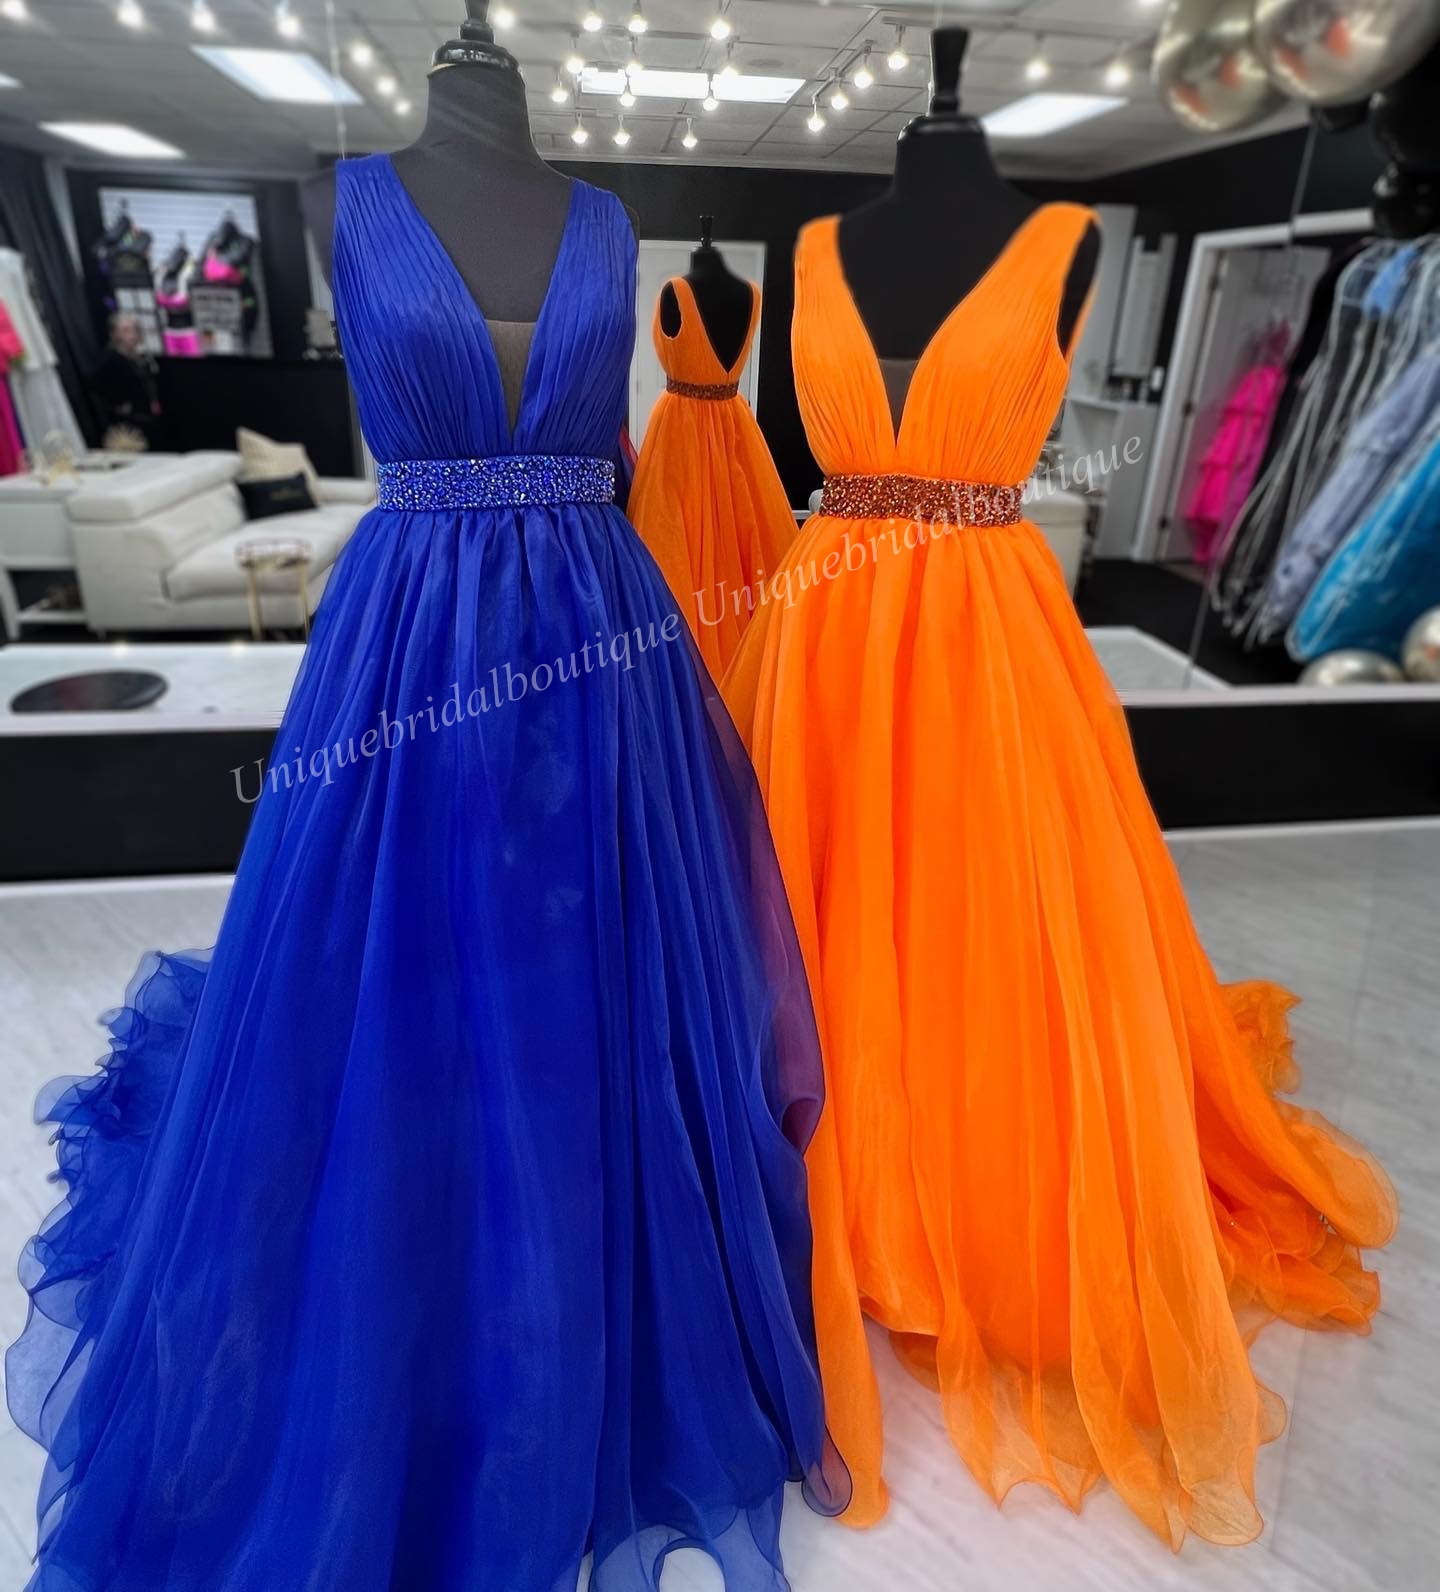 Plunging V-Neck Ballgown Prom Dress 2k23 Orange Organza Crystal Waistband Lady Pageant Formal Evening Event Party Runway Black-Tie Gala Gown Junior Senior Royal Red